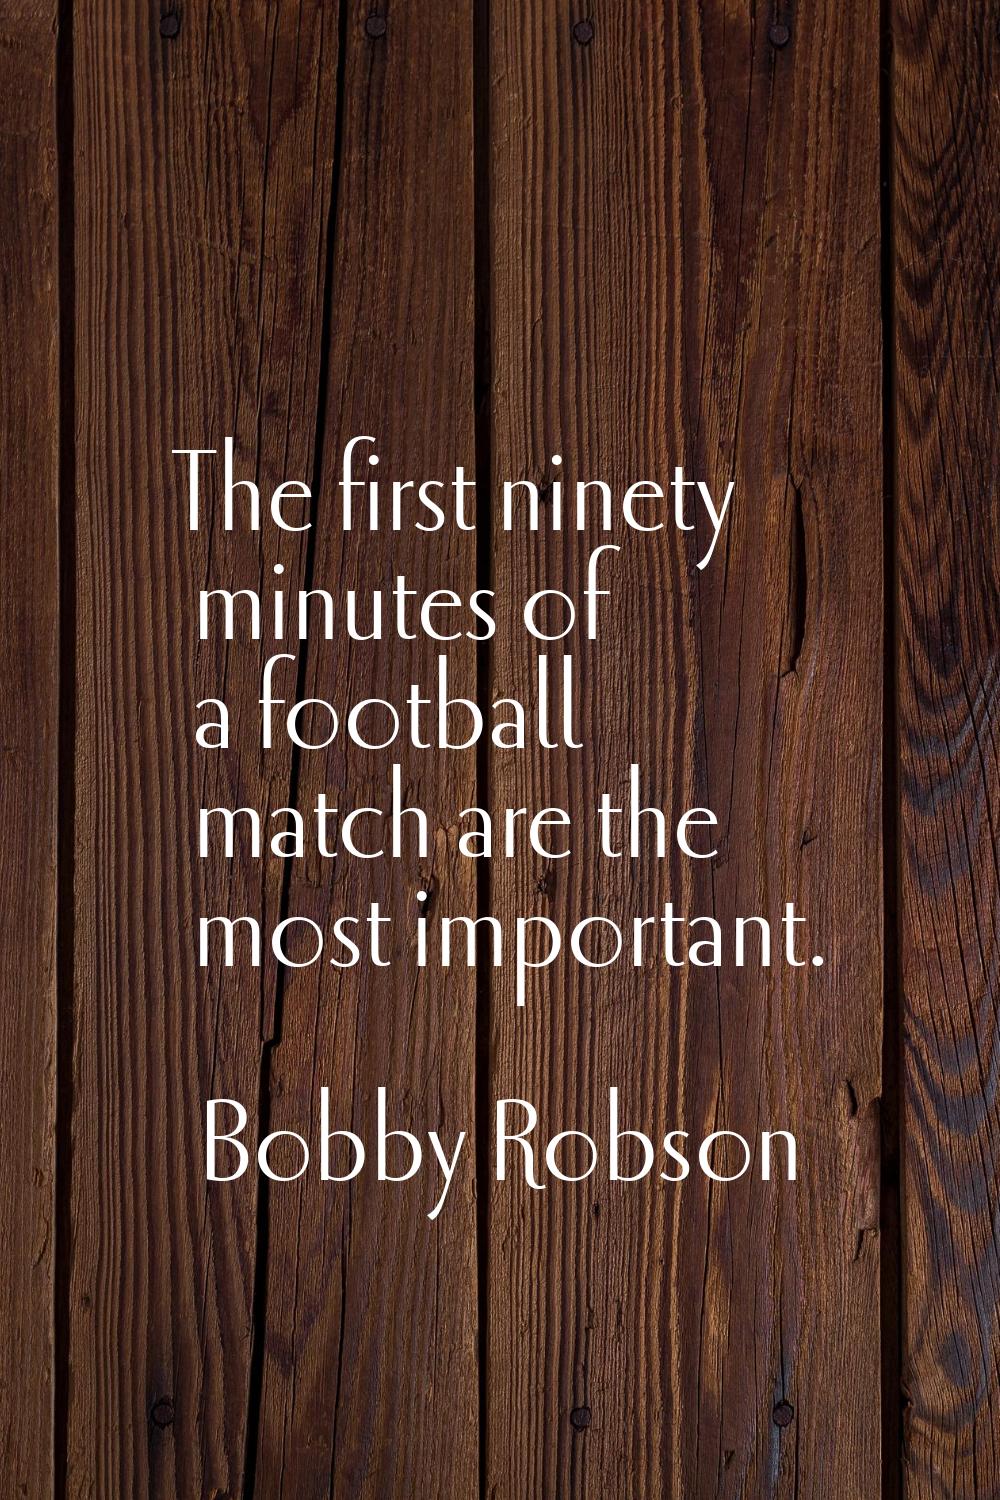 The first ninety minutes of a football match are the most important.